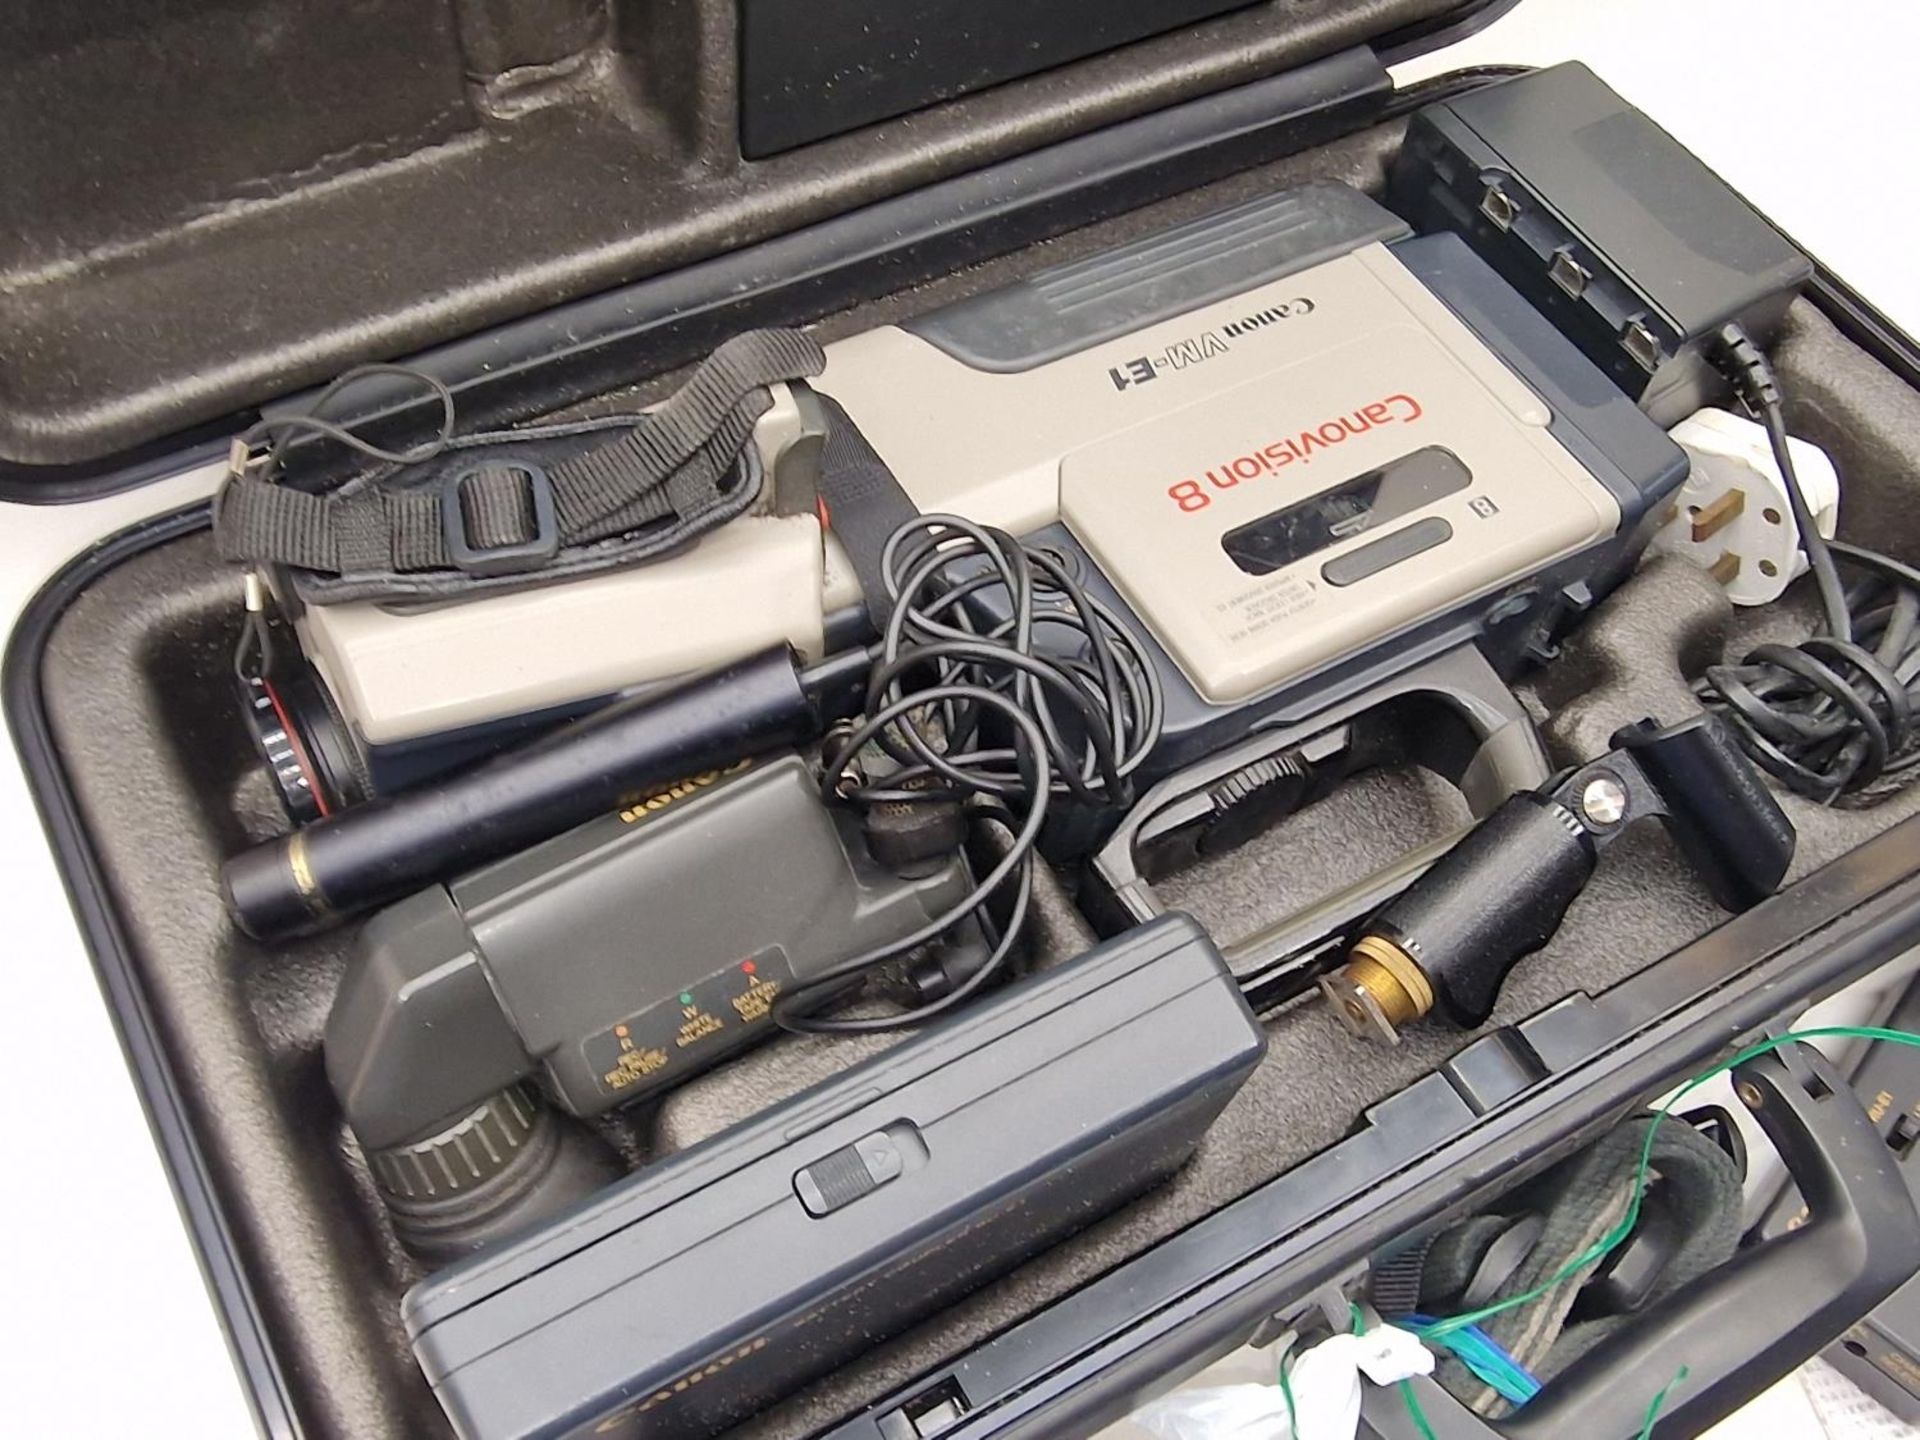 Vintage Canon VM-E1 Canonvision 8 professional video camera/camcorder in case with accessories. - Image 2 of 3